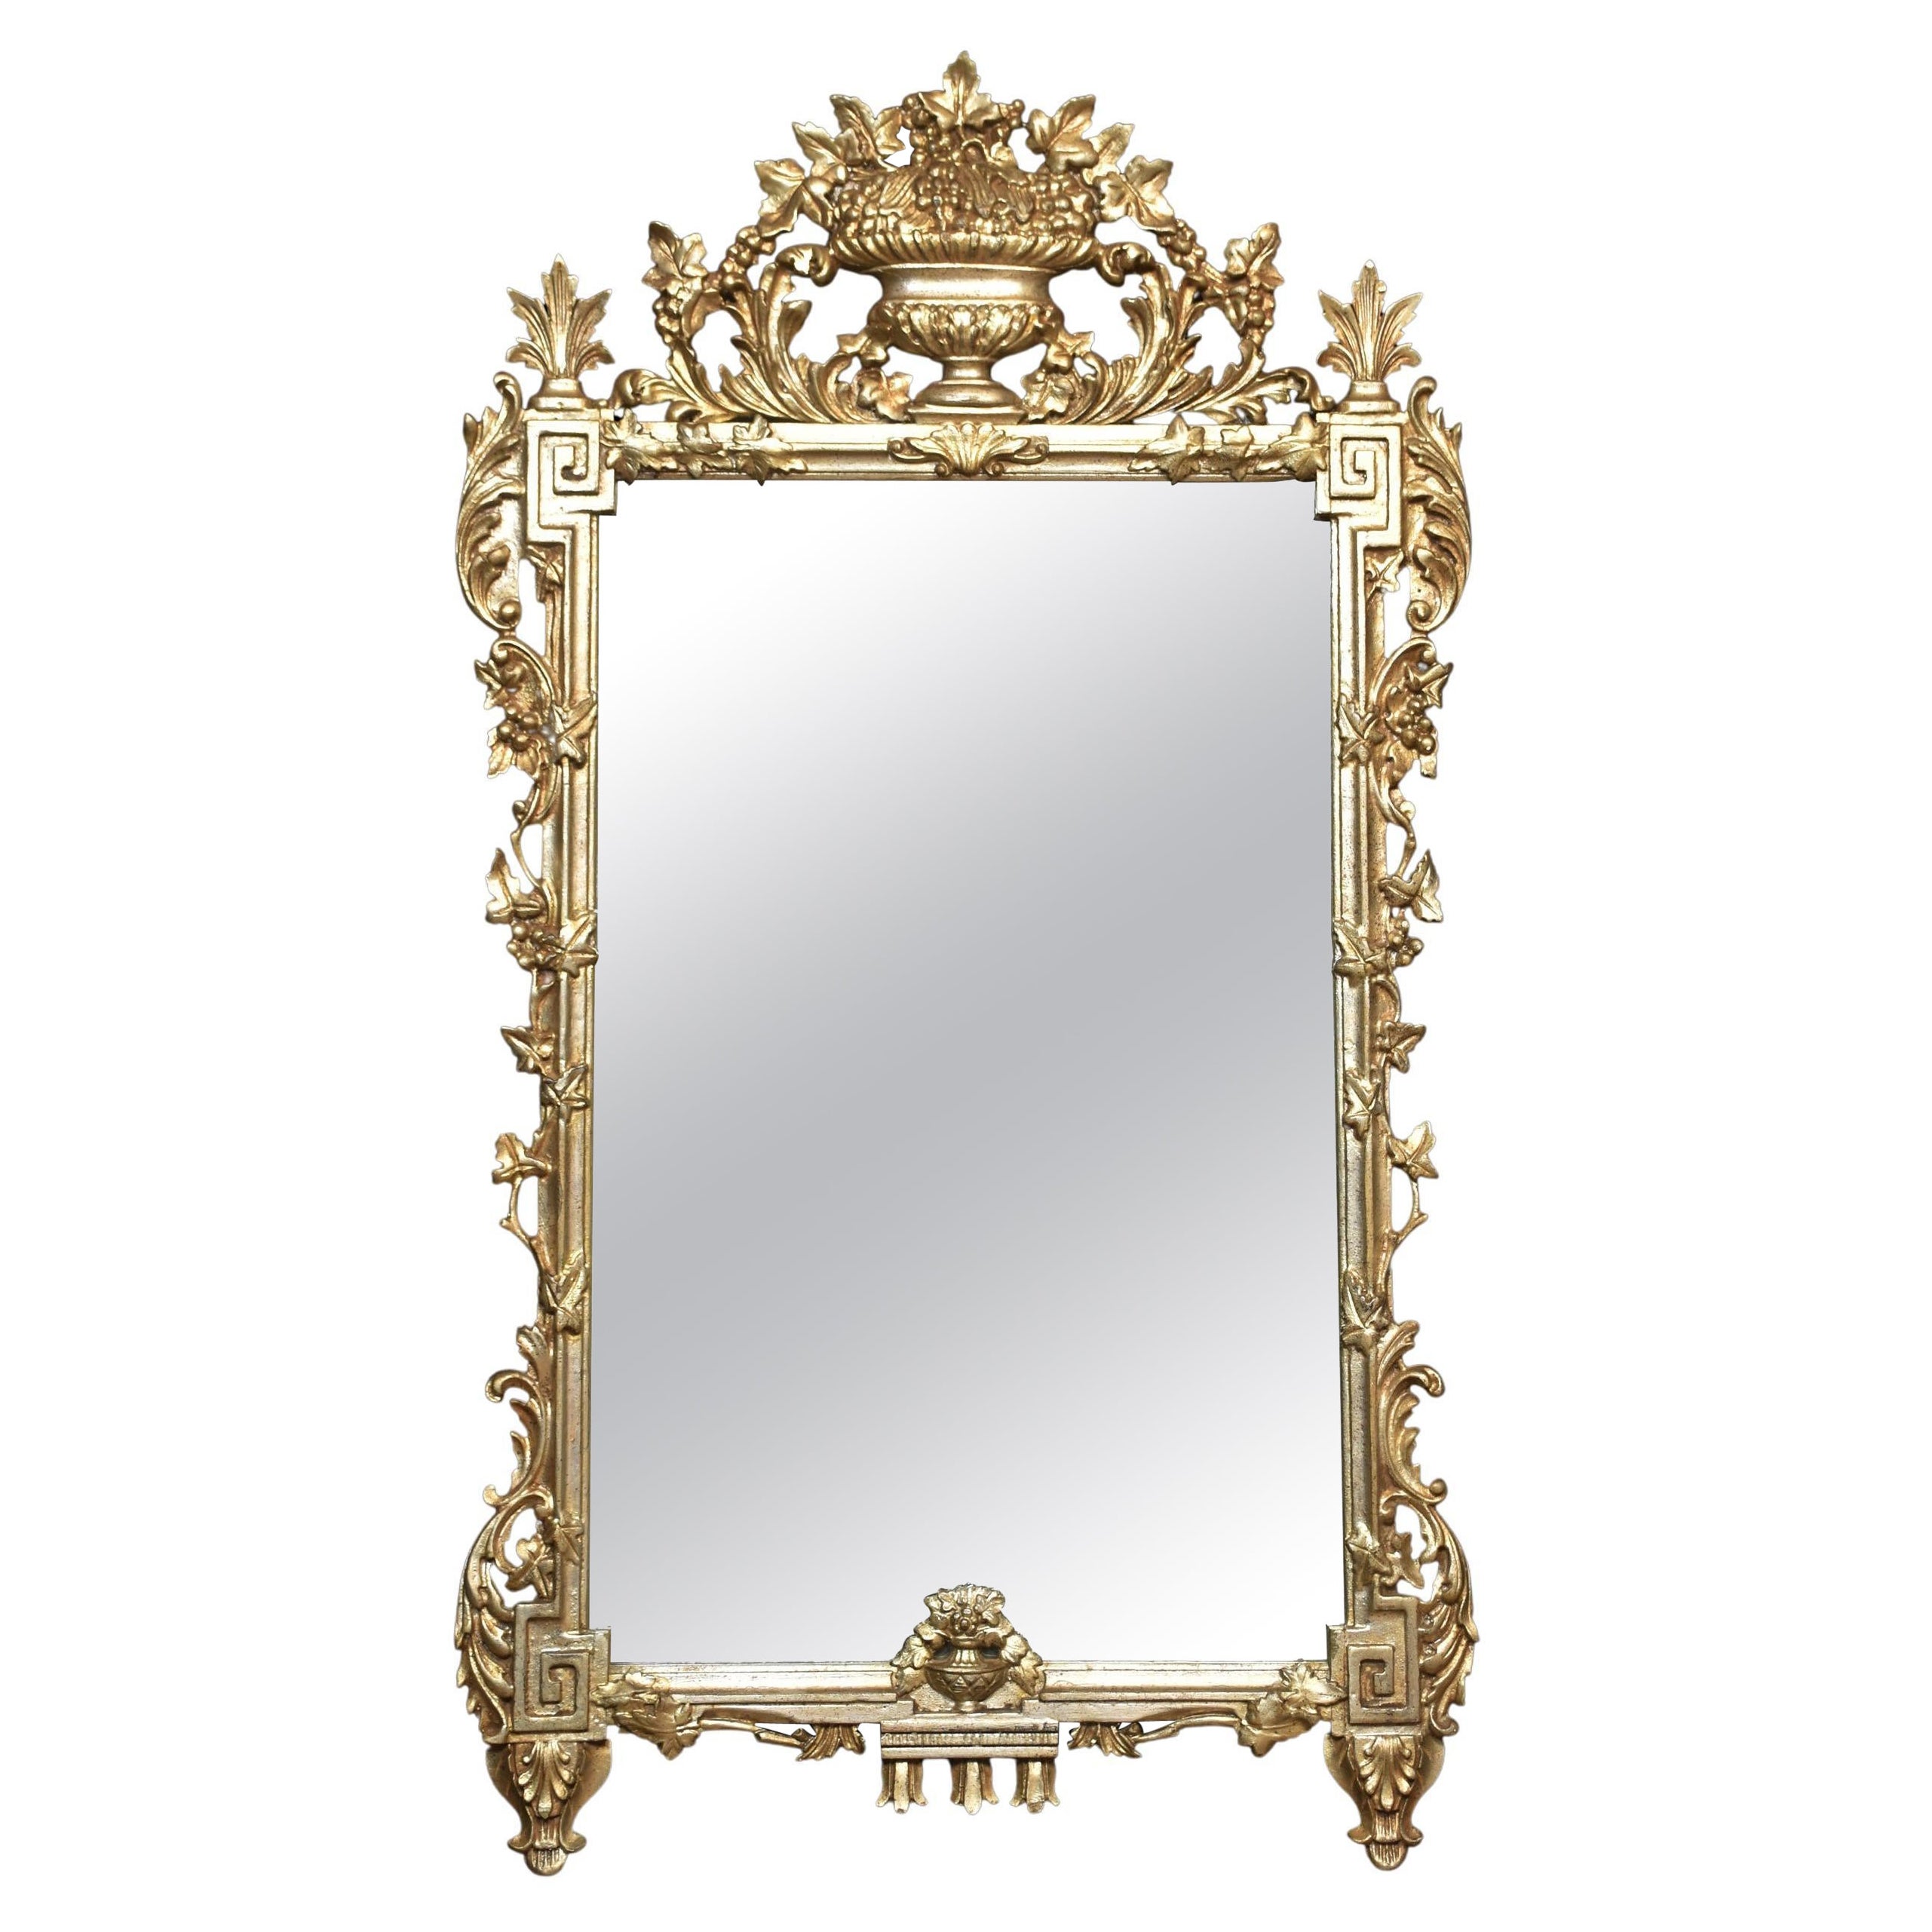 18th Century Venetian-Style Silvered Wall Mirror For Sale